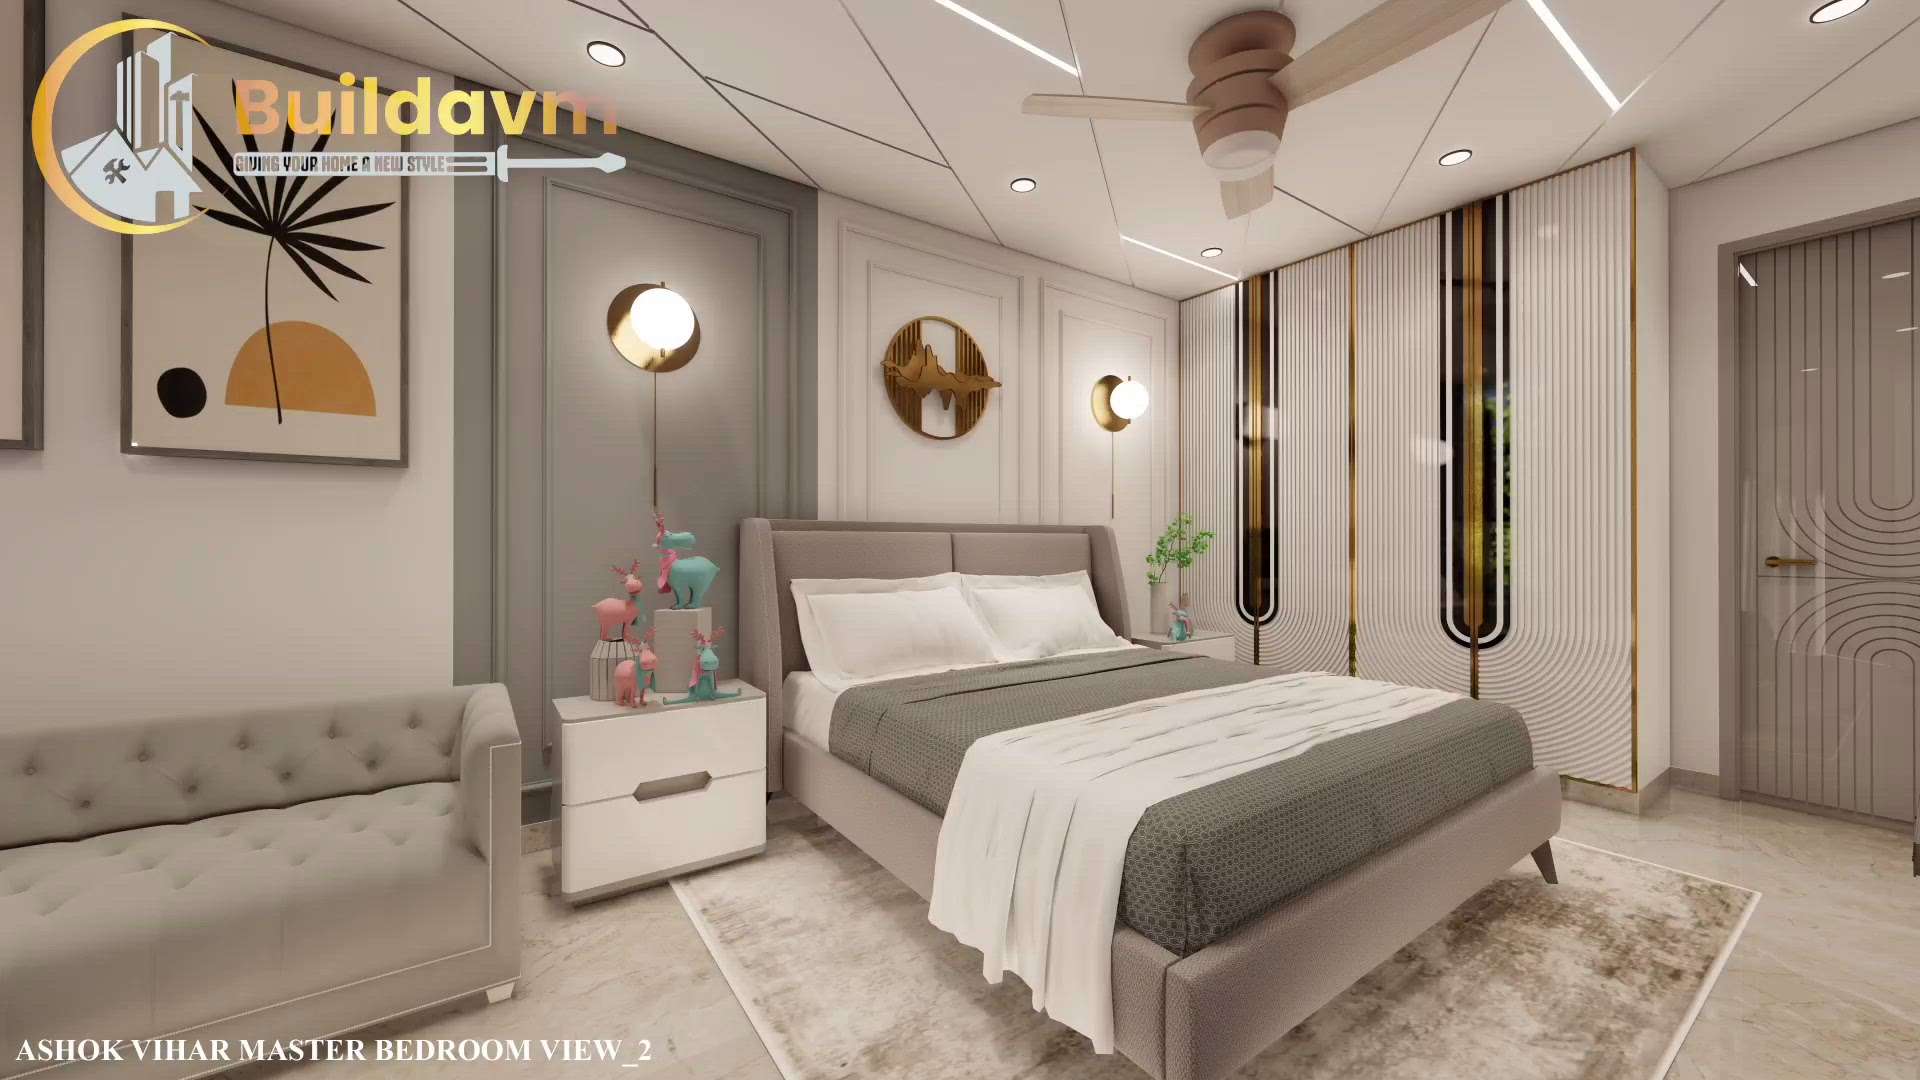 We are Providing Interior/Exterior and construction Services in
[Residential | Commercial  |Salon].

[2D Drawings | 3D work | Walkthrough]

Check out sample work on Instagram handle
(BUILDAVM)

If Interested Call@ 9315444278
WhatsApp me: 9315444278

Thanks & Regards
Best wishes from
Buildavm . #buildavm